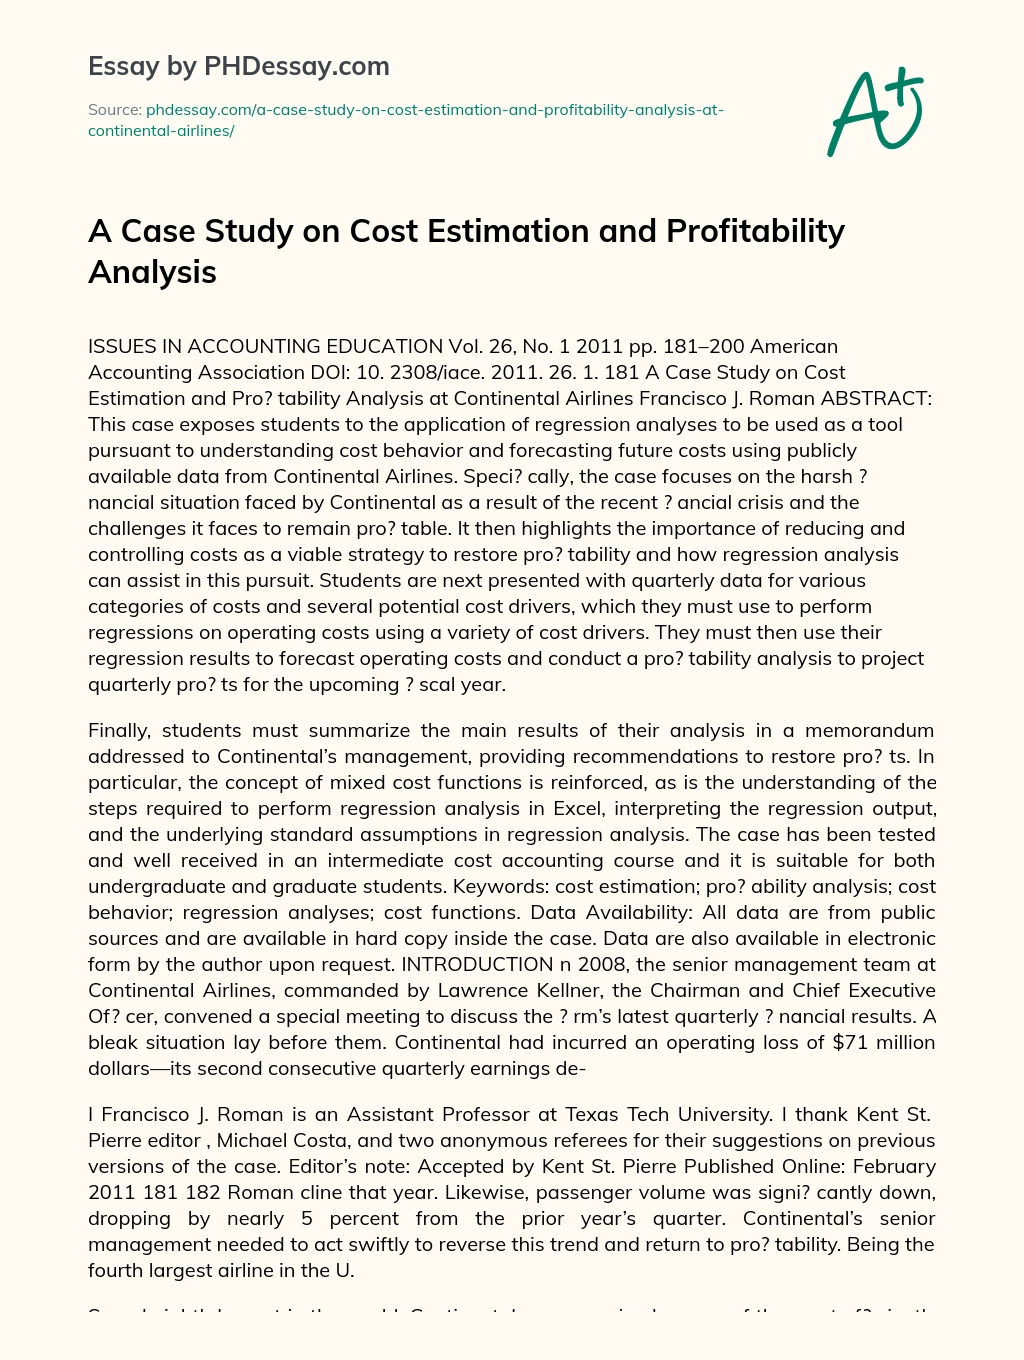 A Case Study on Cost Estimation and Profitability Analysis essay